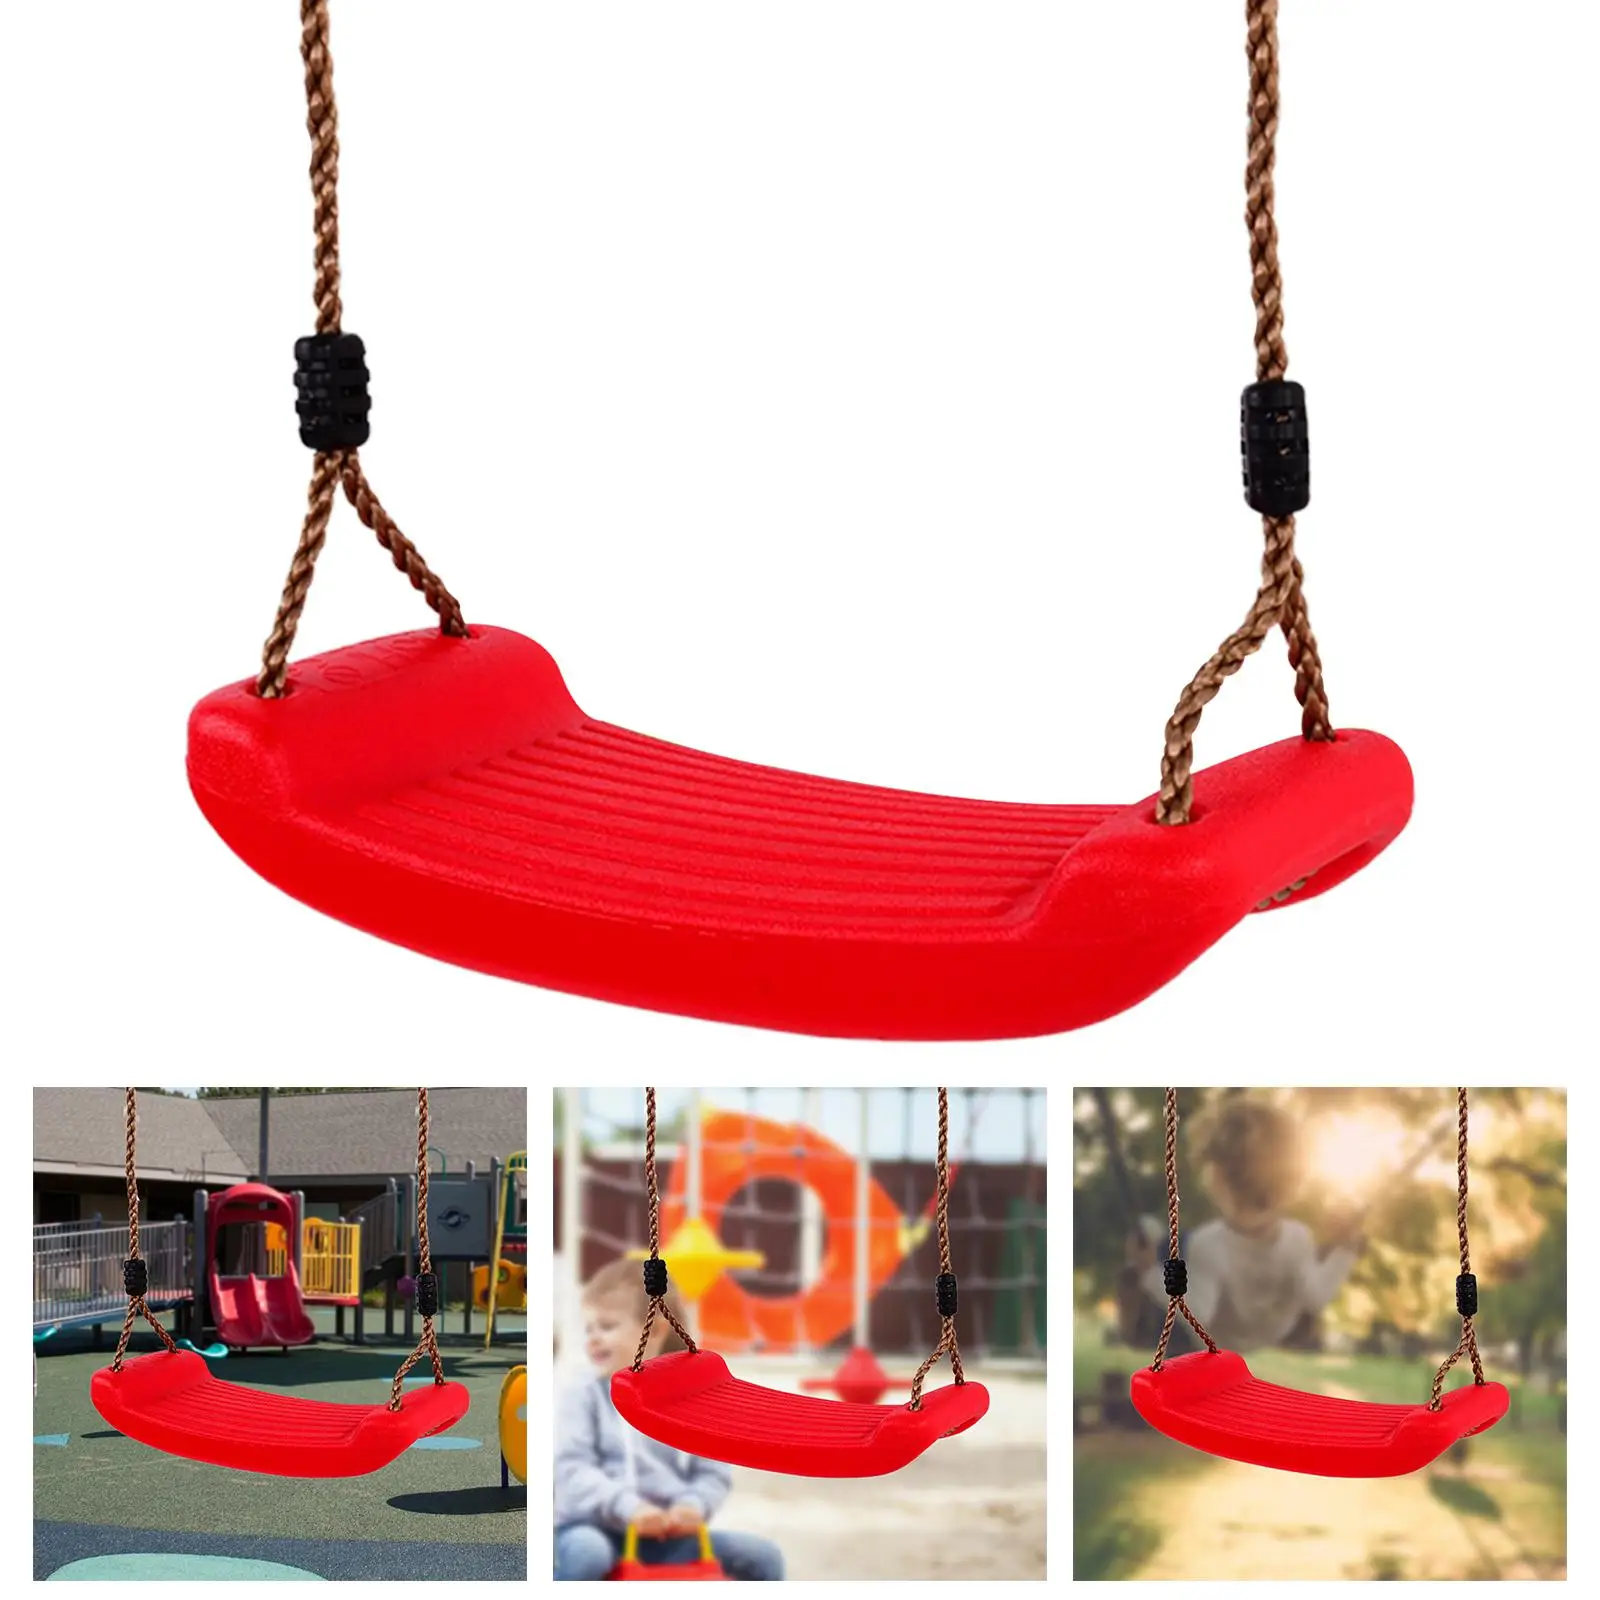 Hanging Children`s Swing Set Flying Toy Plastic Swing Seat Curved Board Swing Chair for Indoor Outdoor Yard Home Tree Backyard